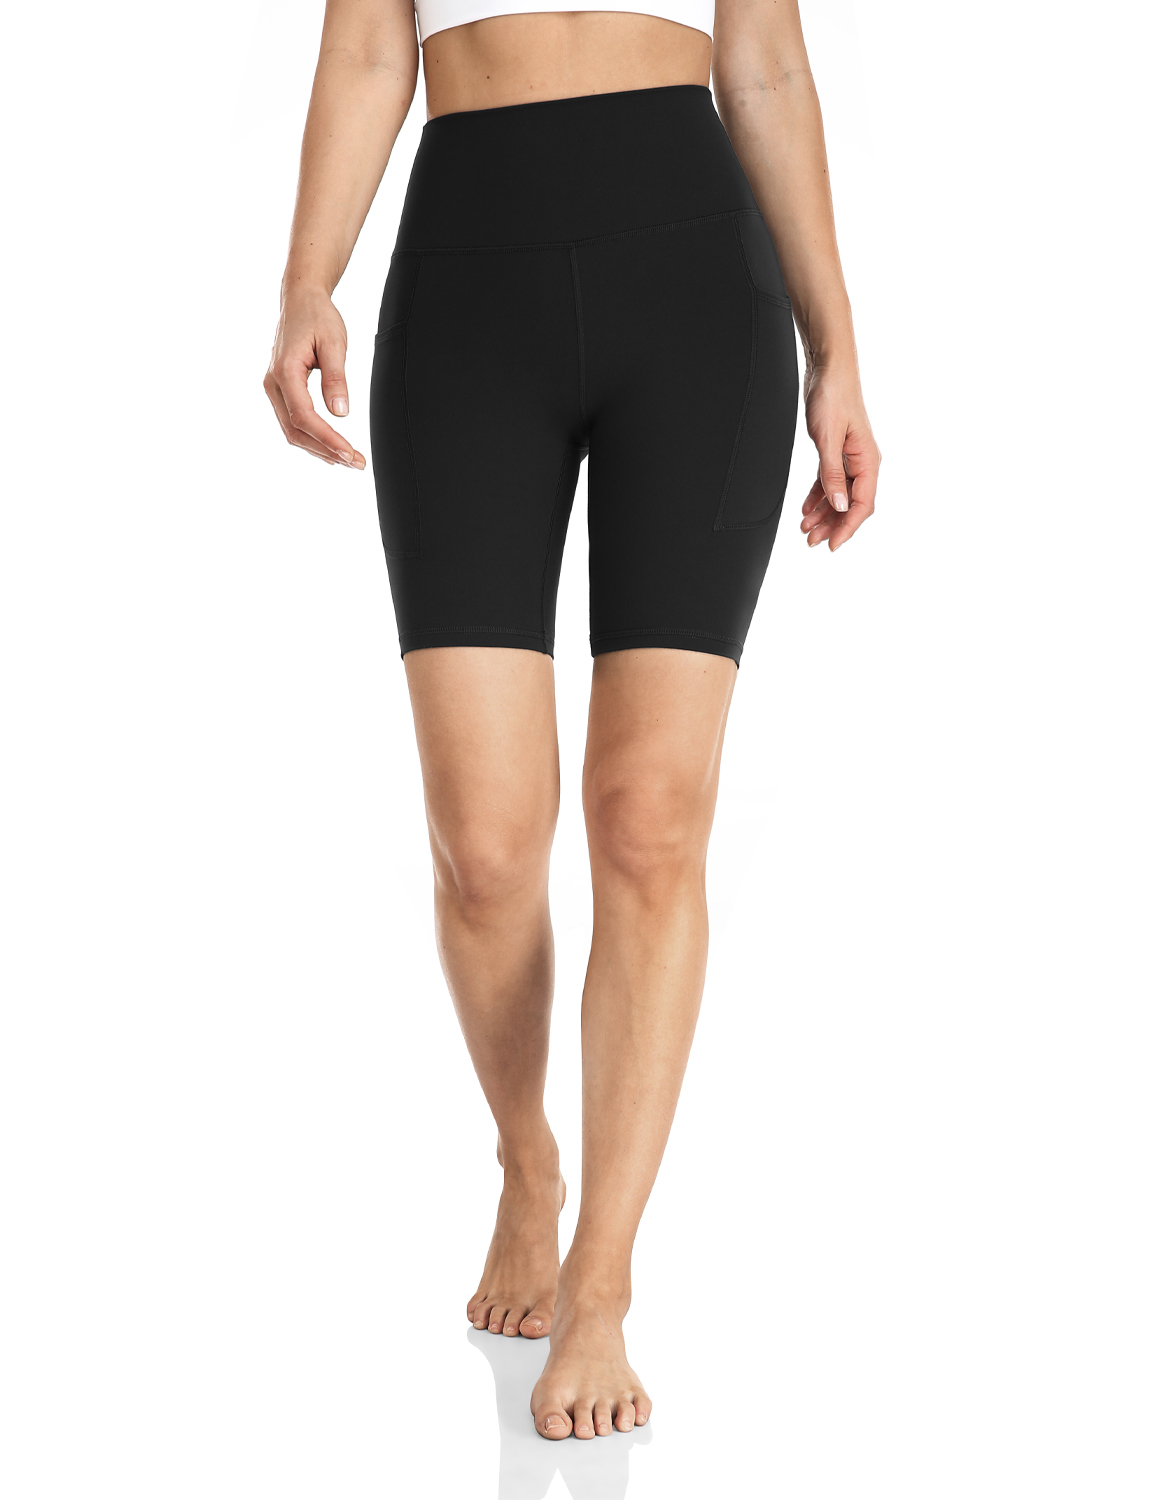 Wear It For Less - 🔥🔥🔥 My new HeyNuts running shorts with a side pocket  and liner are down to only $16 (reg $27)! That's an amazing price for this  brand, awesome